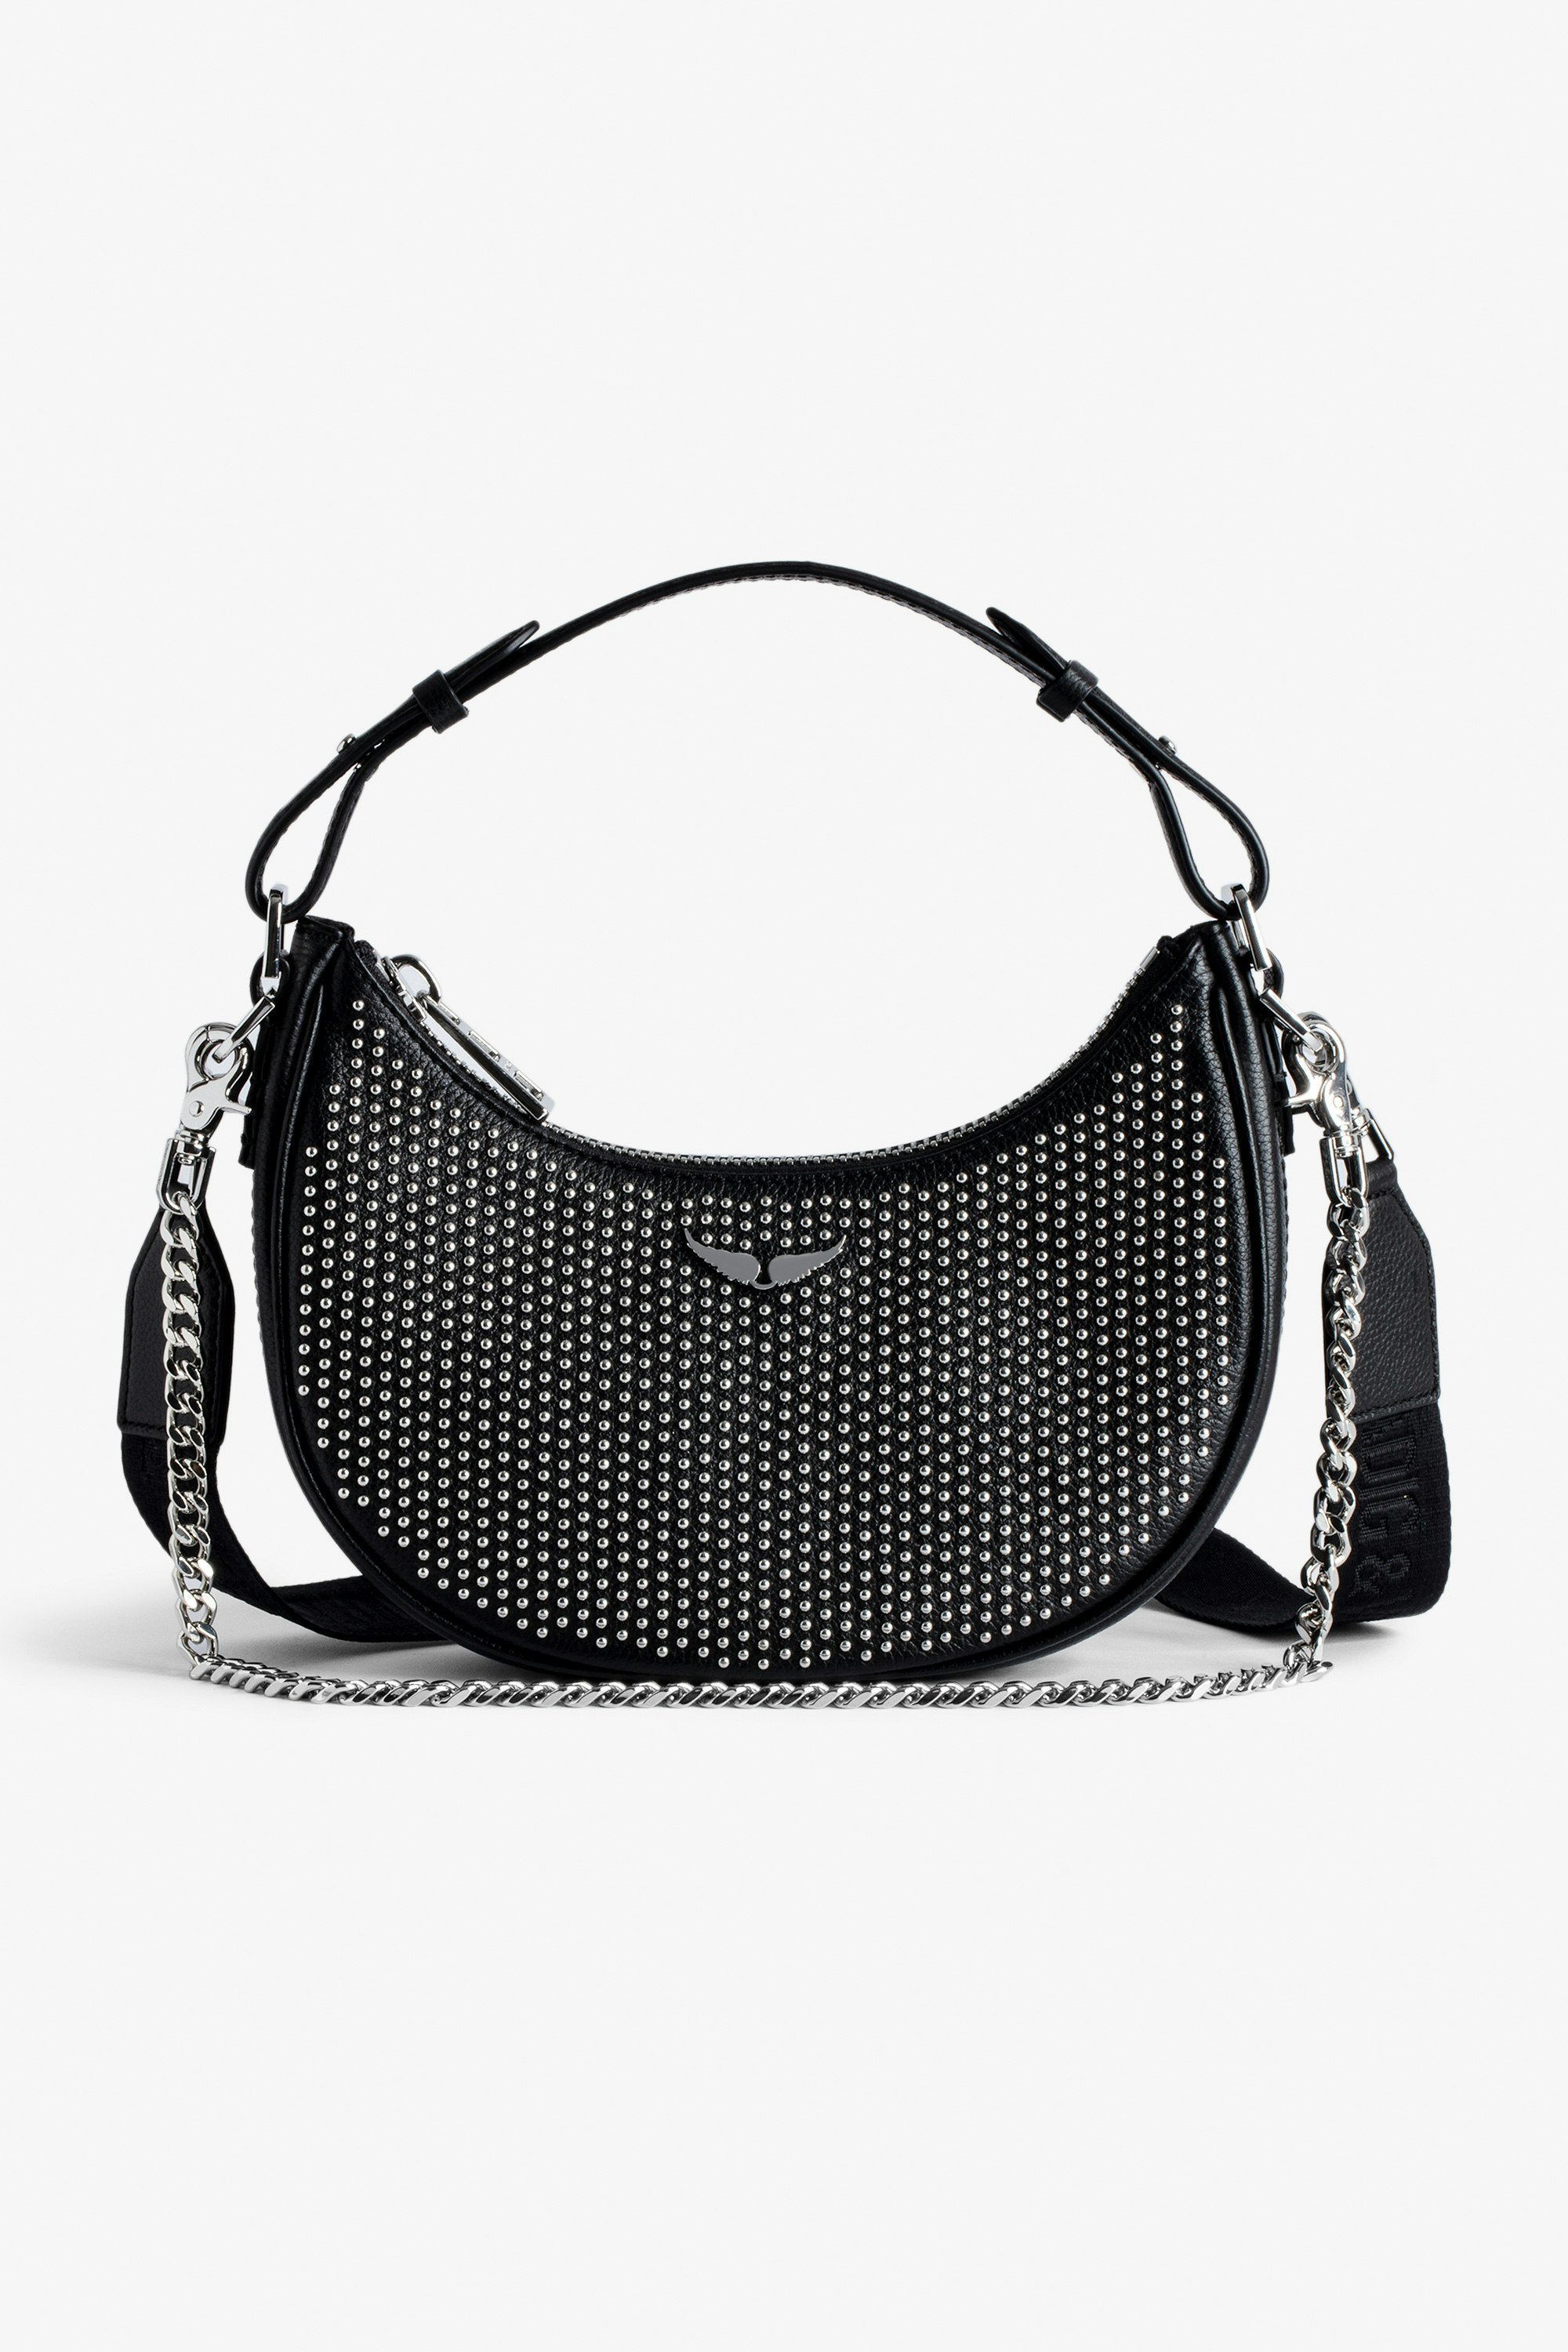 Moonrock Dotted Swiss Bag Women’s half-moon bag in black grained leather with a short handle, shoulder strap, chain and signature wings.